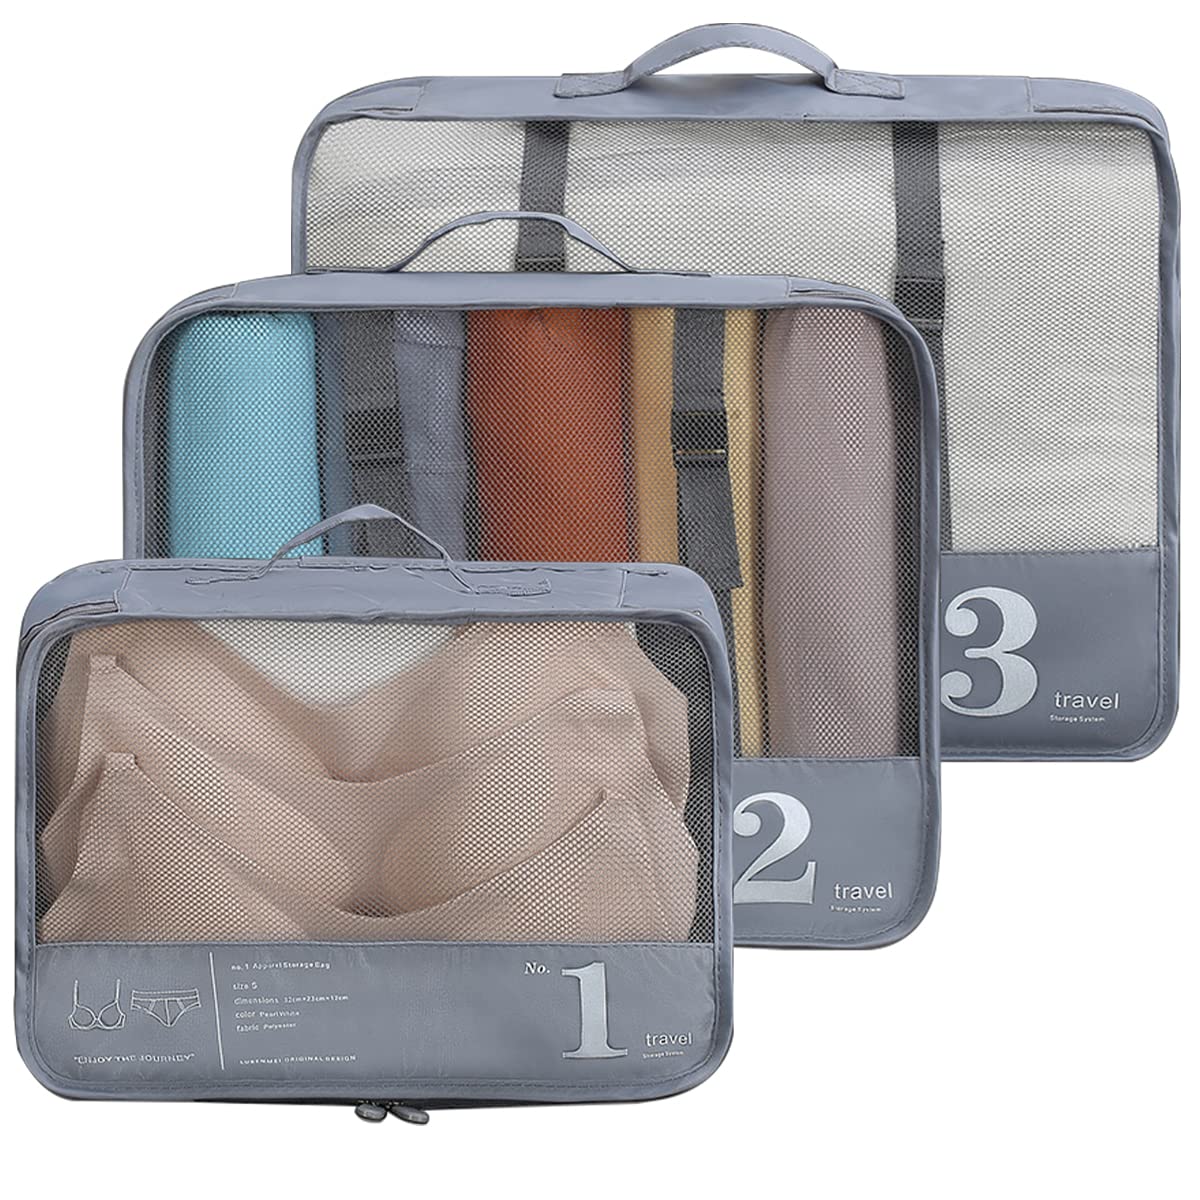 3 Set Packing Waterproof cubes for Travel luggage Organizer Luggage Cubes Grey HLC085